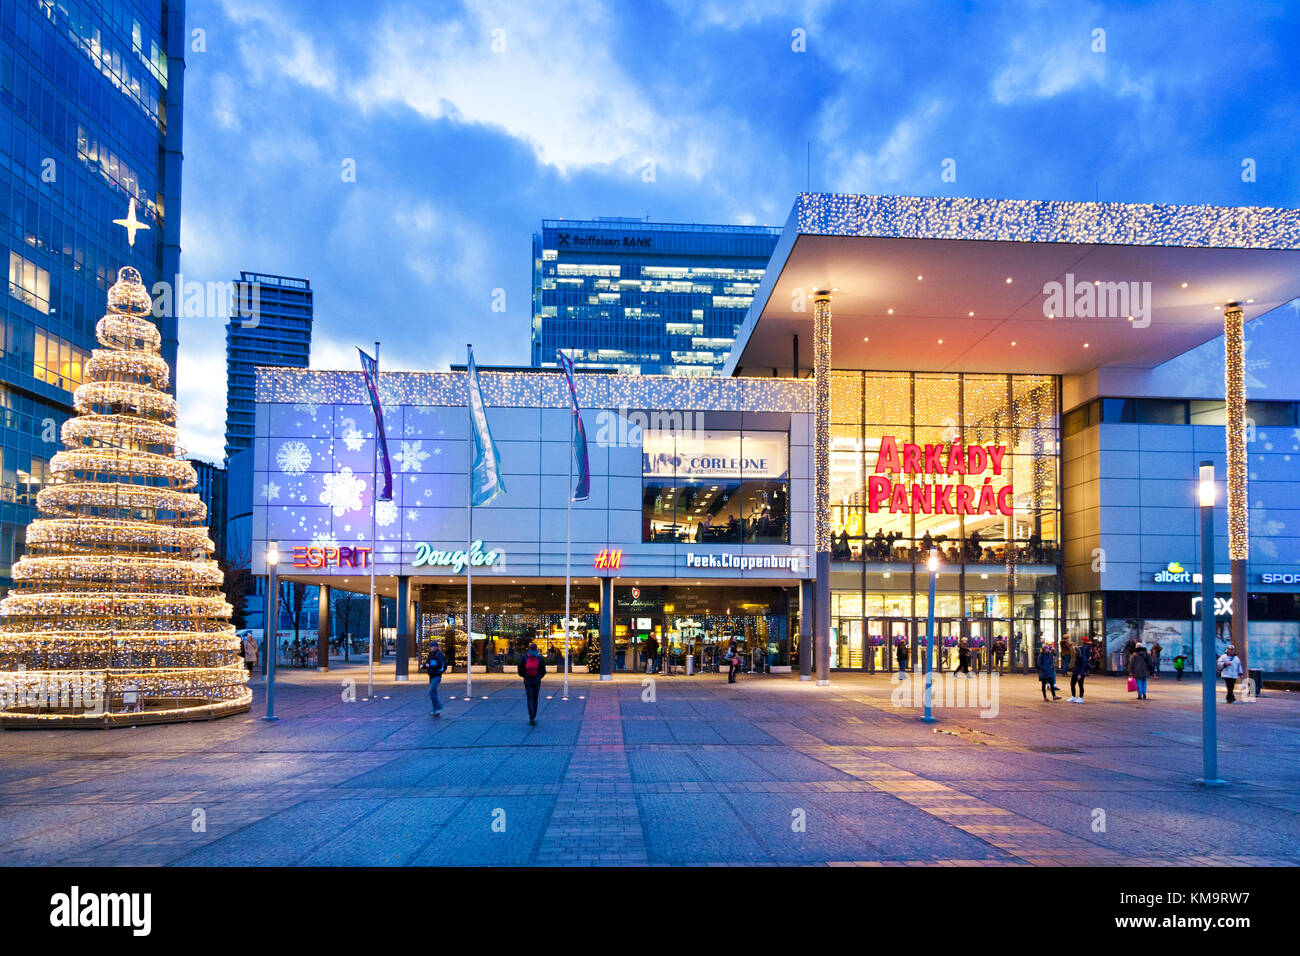 Page 3 - Shopping Mall Christmas High Resolution Stock Photography and  Images - Alamy